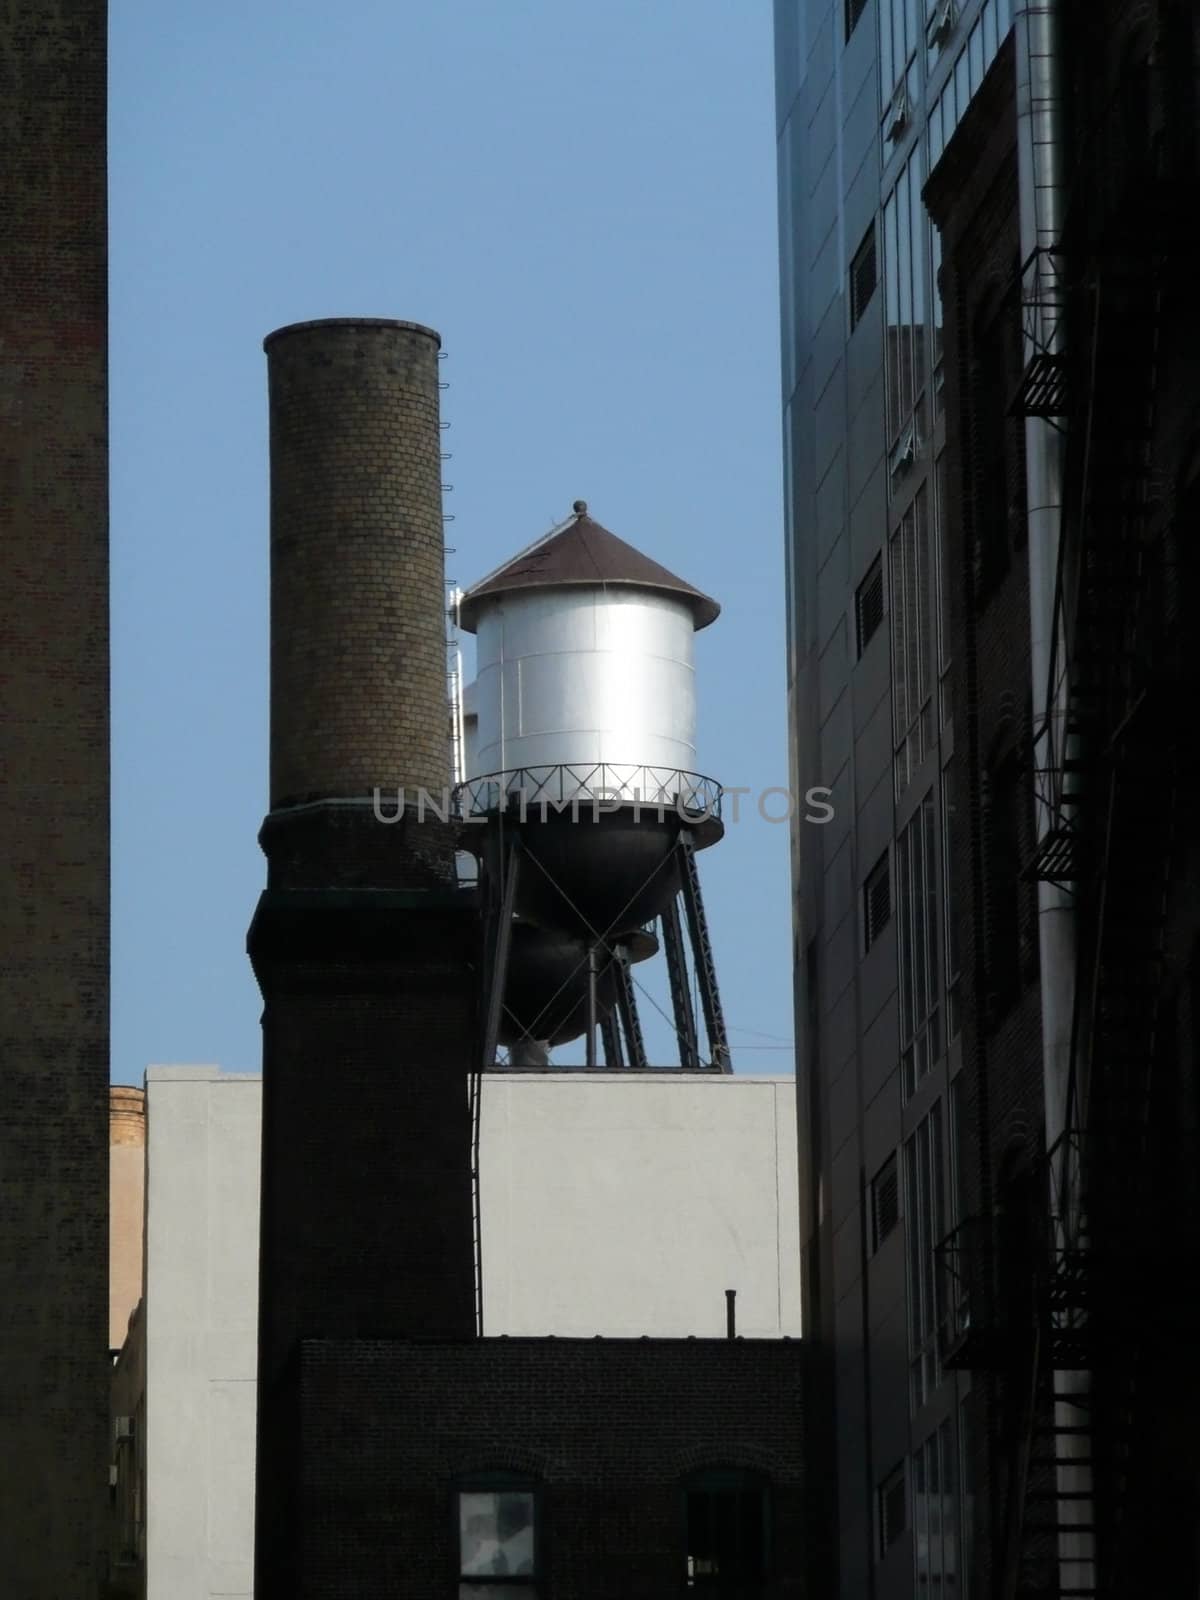 Water tank atop Manhattan building by daboost